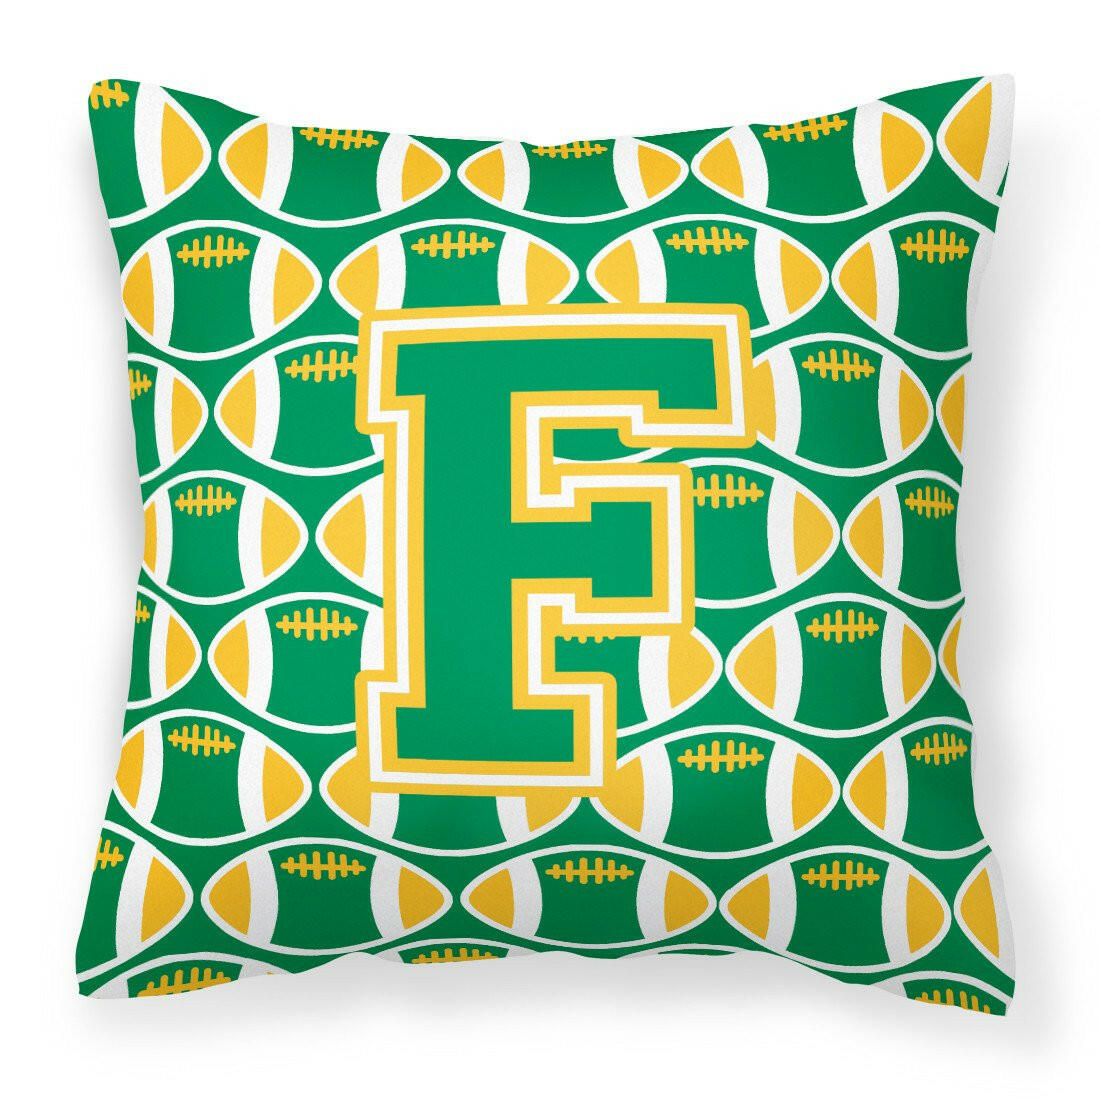 Letter F Football Green and Gold Fabric Decorative Pillow CJ1069-FPW1414 by Caroline's Treasures